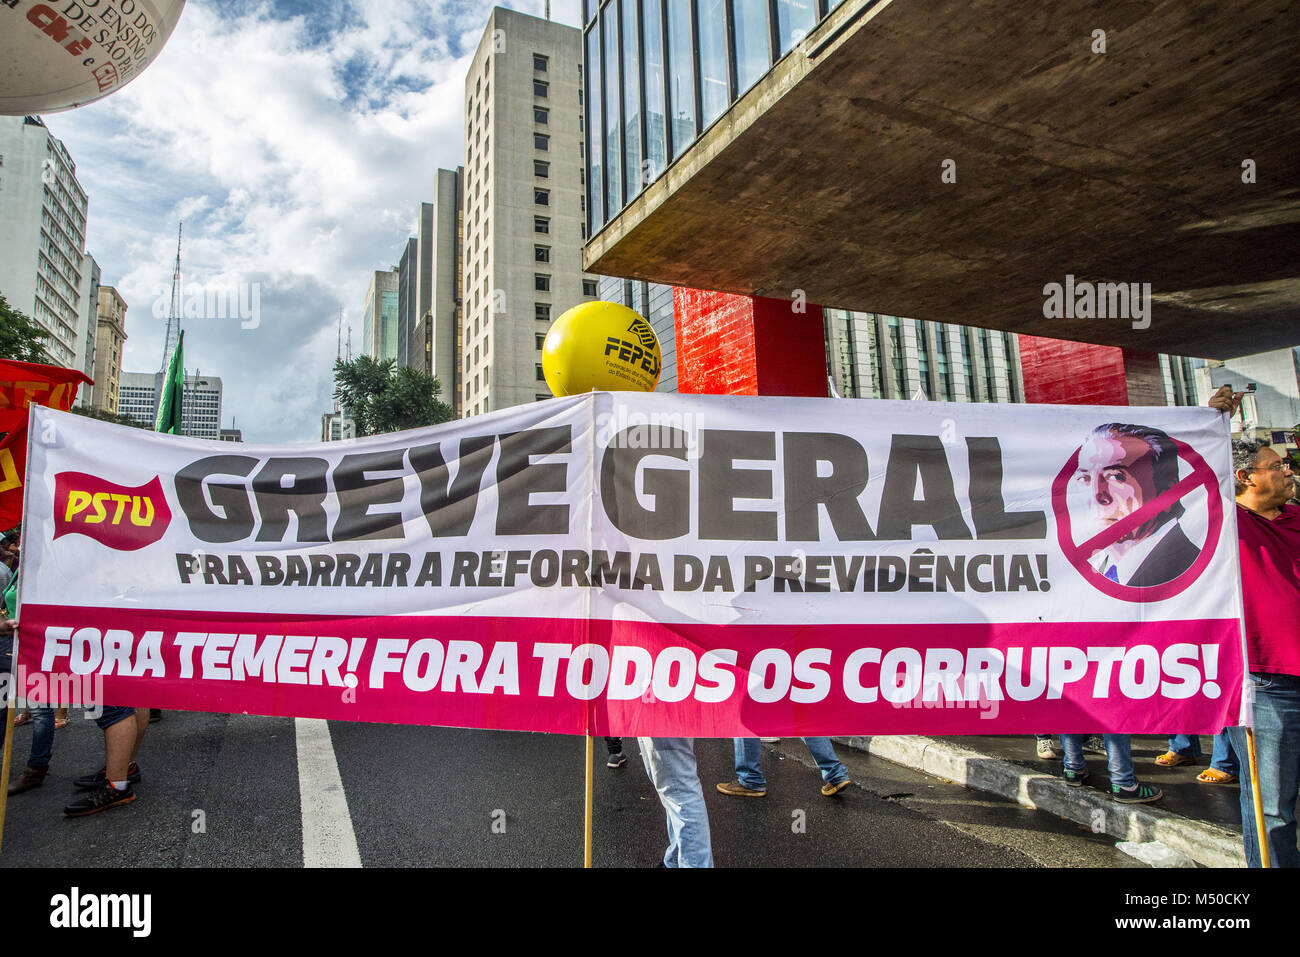 Sao Paulo, Brazil. February 19, 2018 - Demonstrators take part in a protest against the social welfare reform bill introduced by President Michel Temer government which seeks to extend the years of contributions and raise the minimum age for retirement, in Sao Paulo, Brazil, on February 19, 2018. Credit: Cris Faga/ZUMA Wire/Alamy Live News Stock Photo